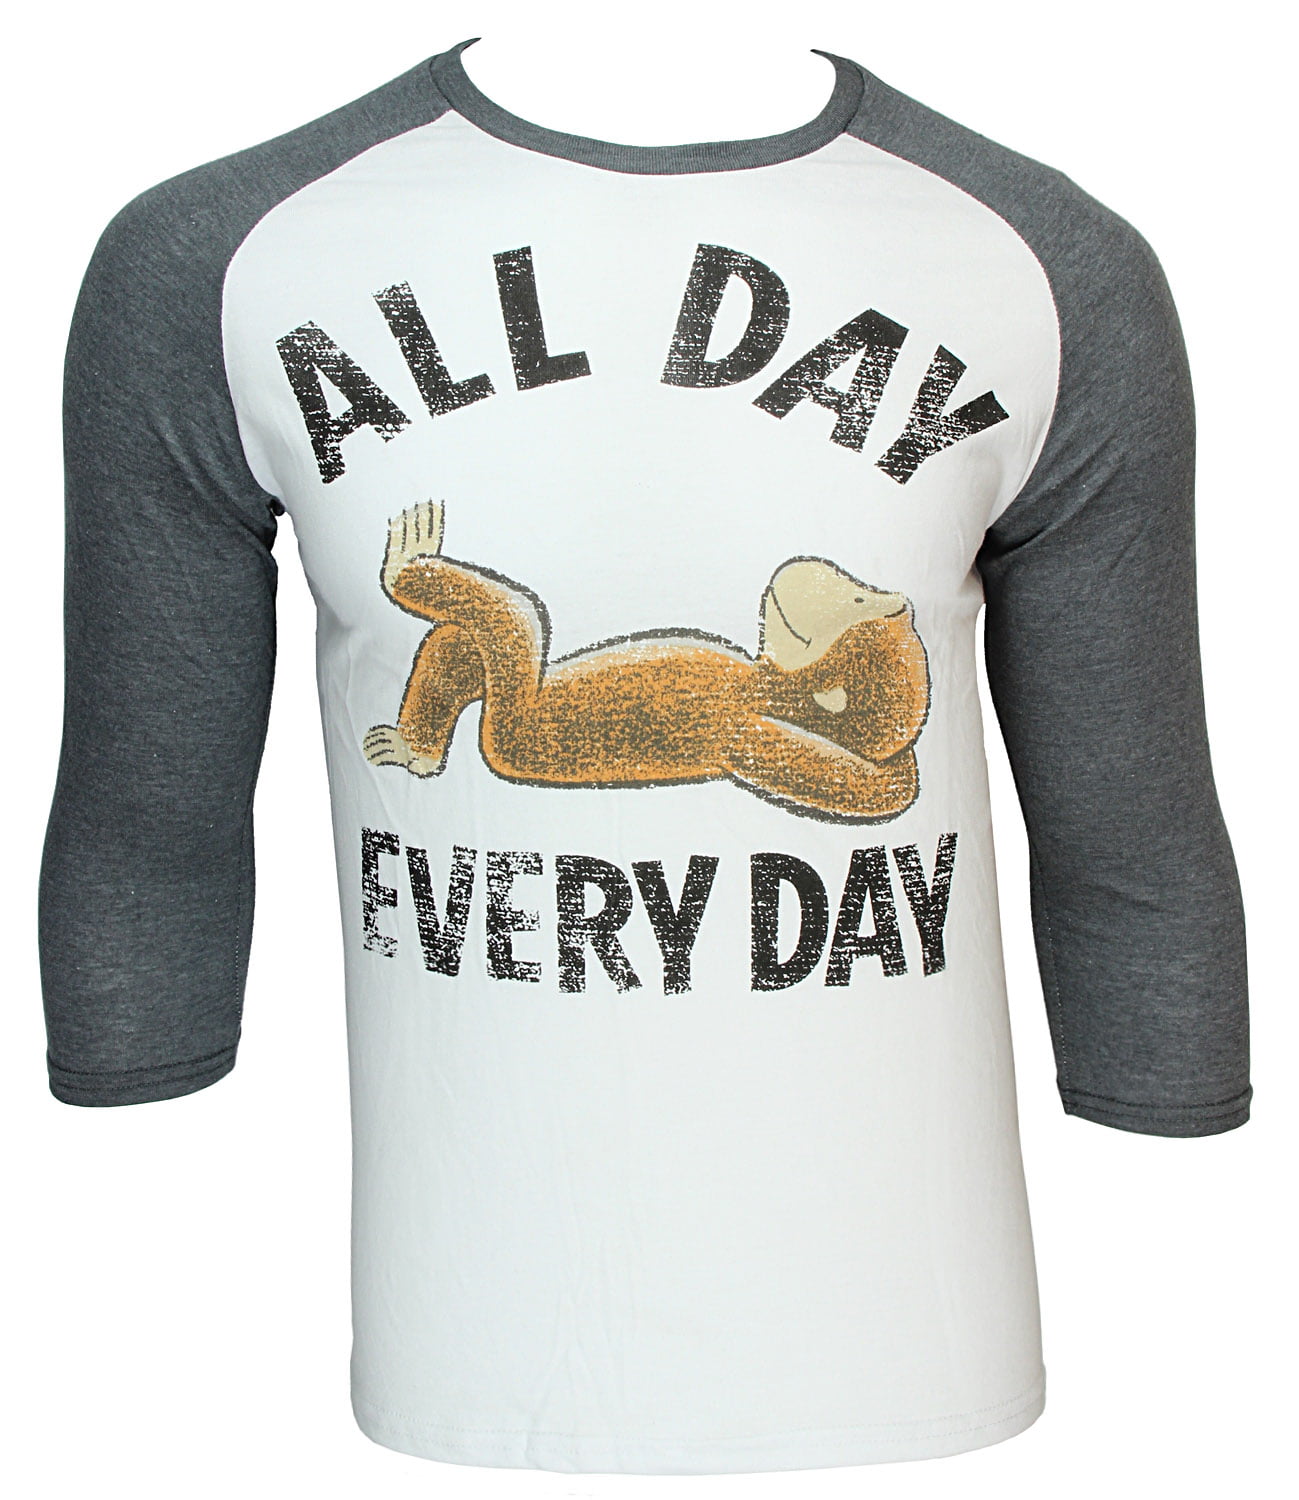 Mens CURIOUS GEORGE "ALL DAY EVERY DAY" Tee T-Shirt LARGE L NEW -NWOT